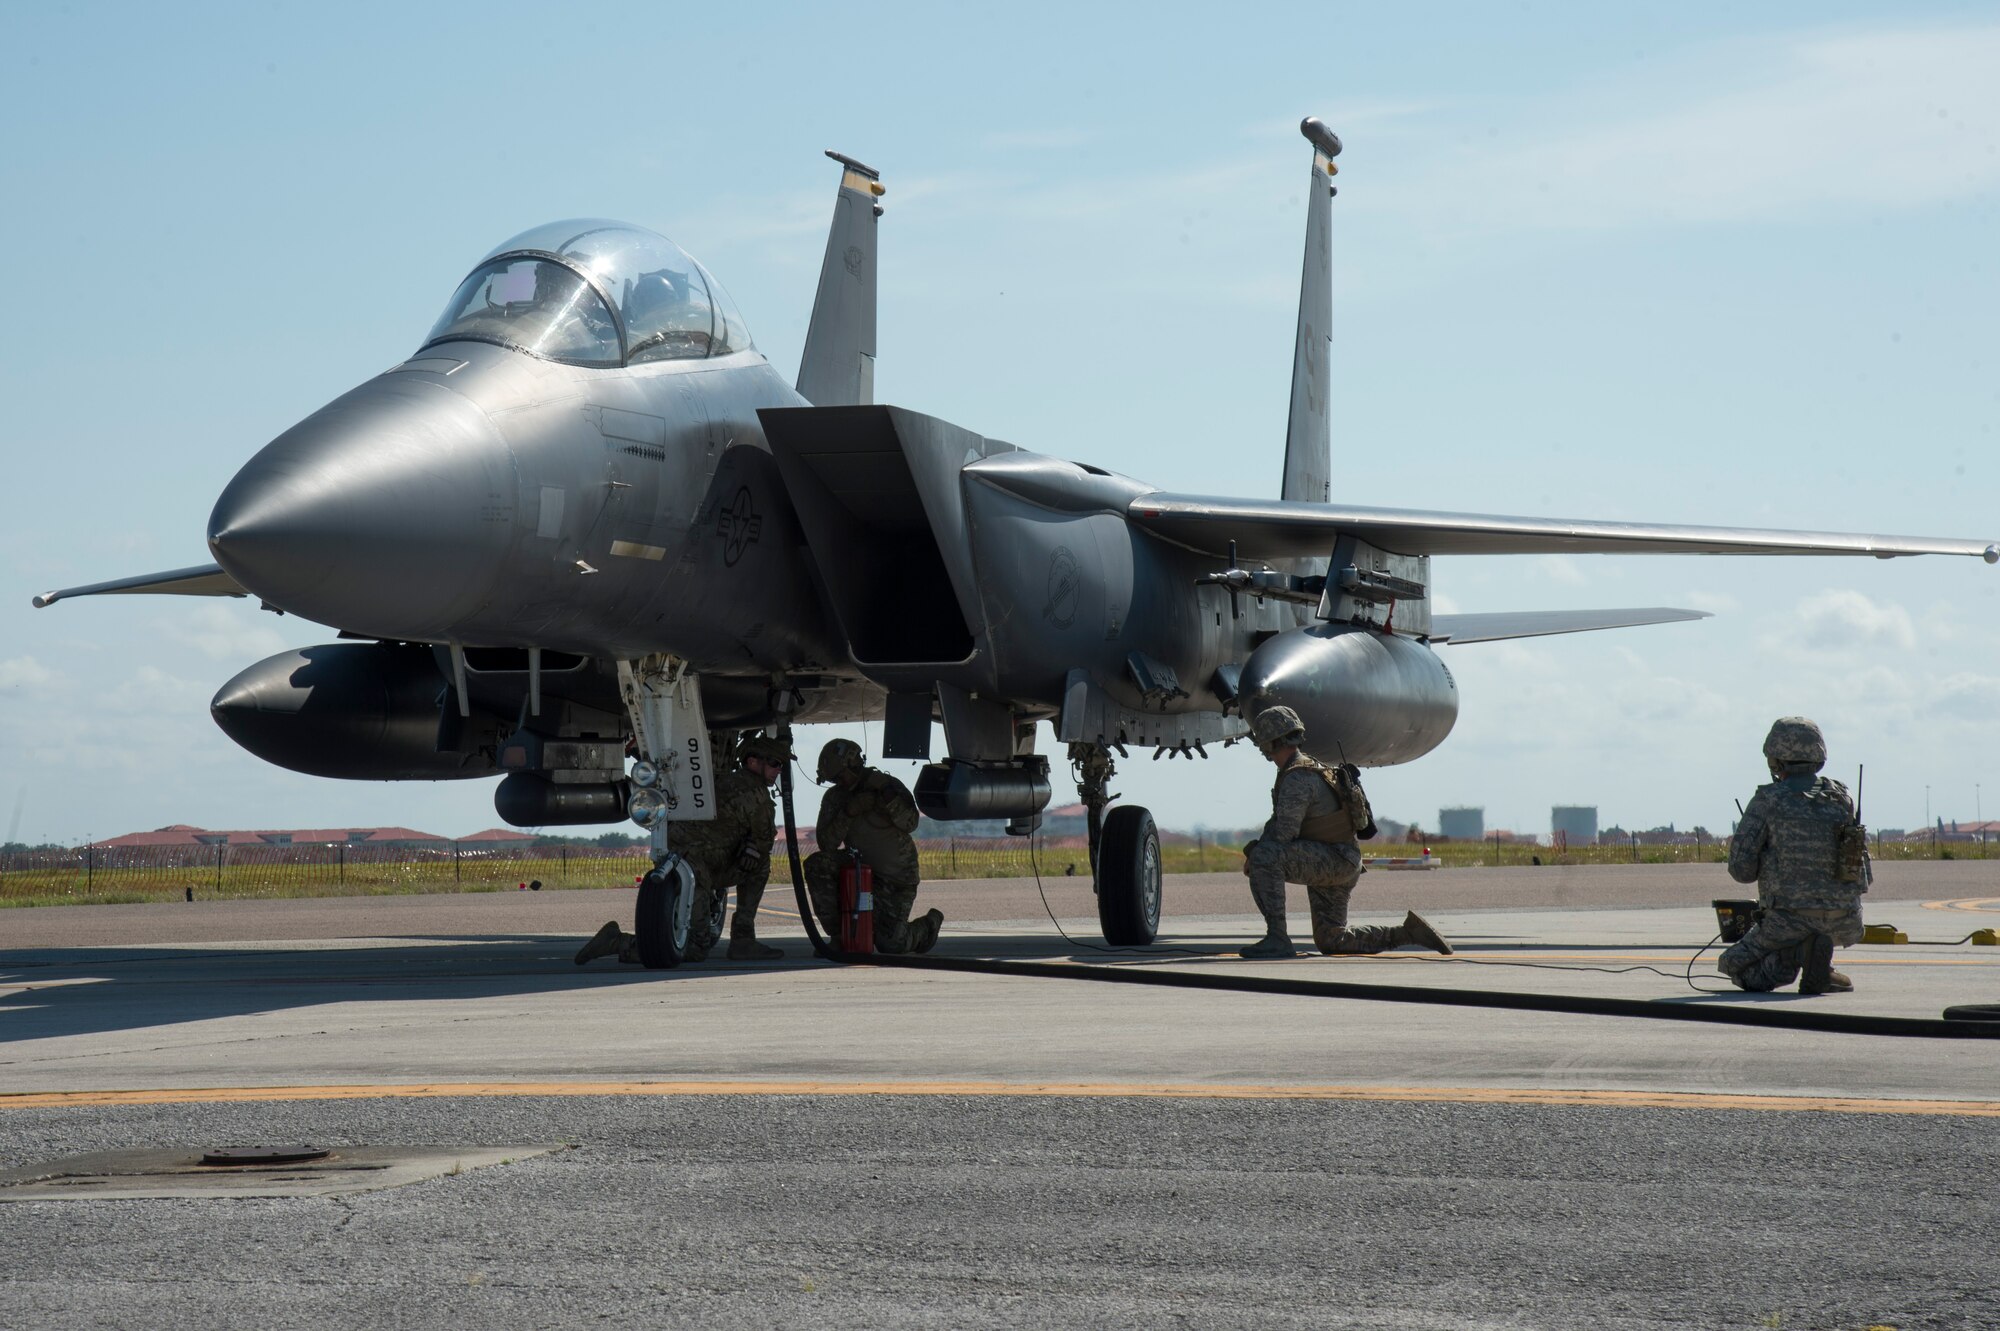 U.S. Air Force Airmen from Seymour Johnson Air Force Base, N.C., along with Airmen from the 6th Logistics Readiness Squadron at MacDill AFB, Fla., refuel an F-15E fighter aircraft May 10, 2019. During a total force exercise the Airmen secured the airfield, refueled and rearmed fighter aircraft to get them back to the fight as quickly as possible. (U.S. Air Force photo by Airman 1st Class Shannon Bowman)